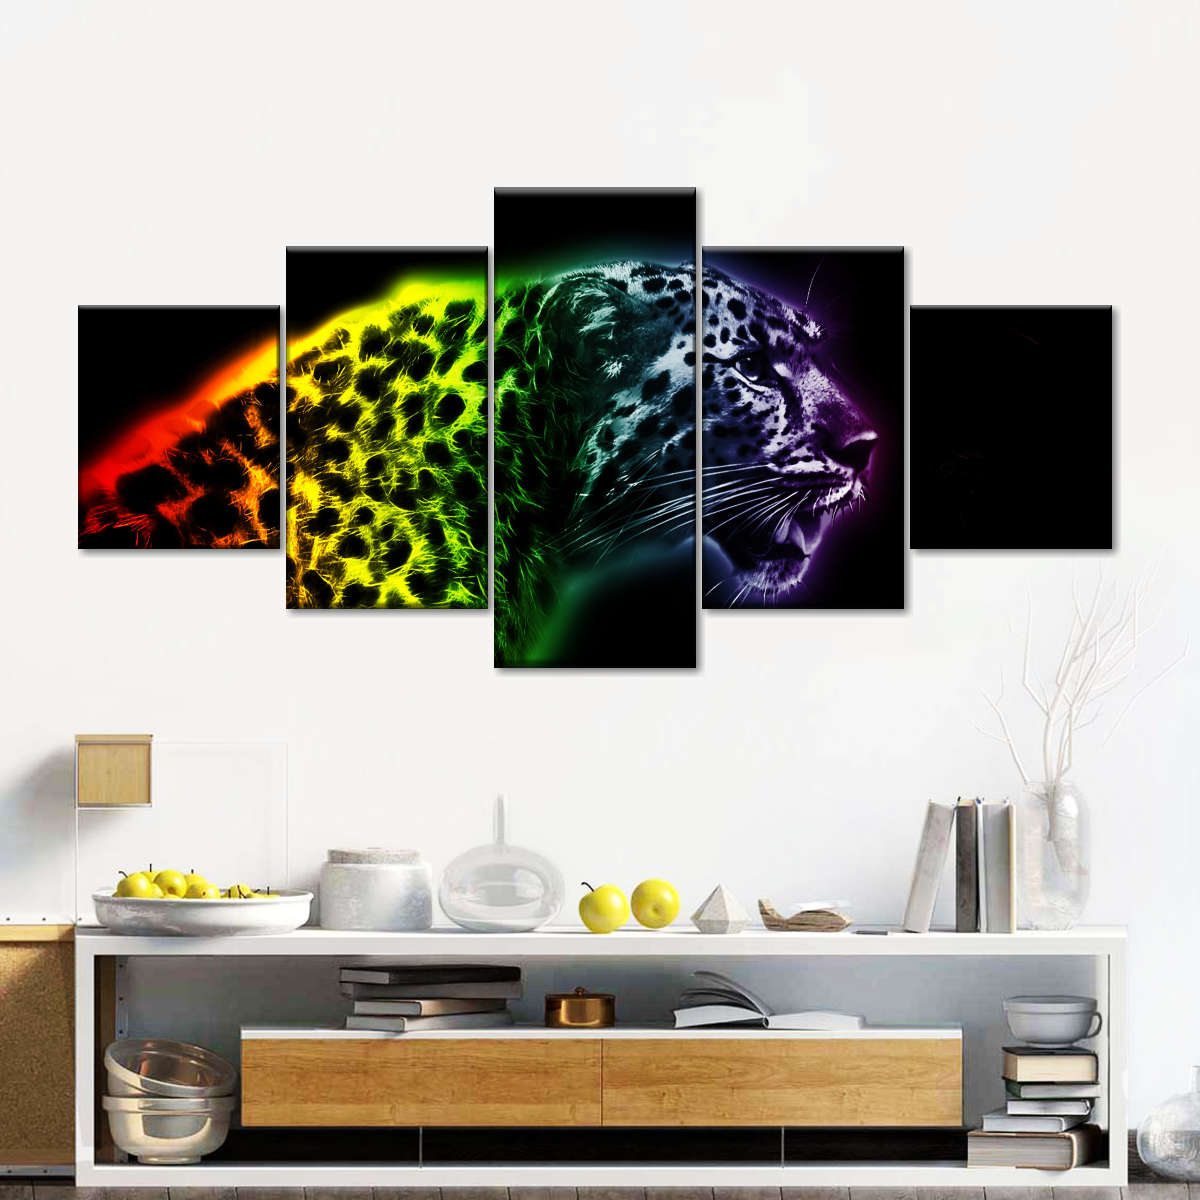 20+ Most Cheetah canvas wall art images info